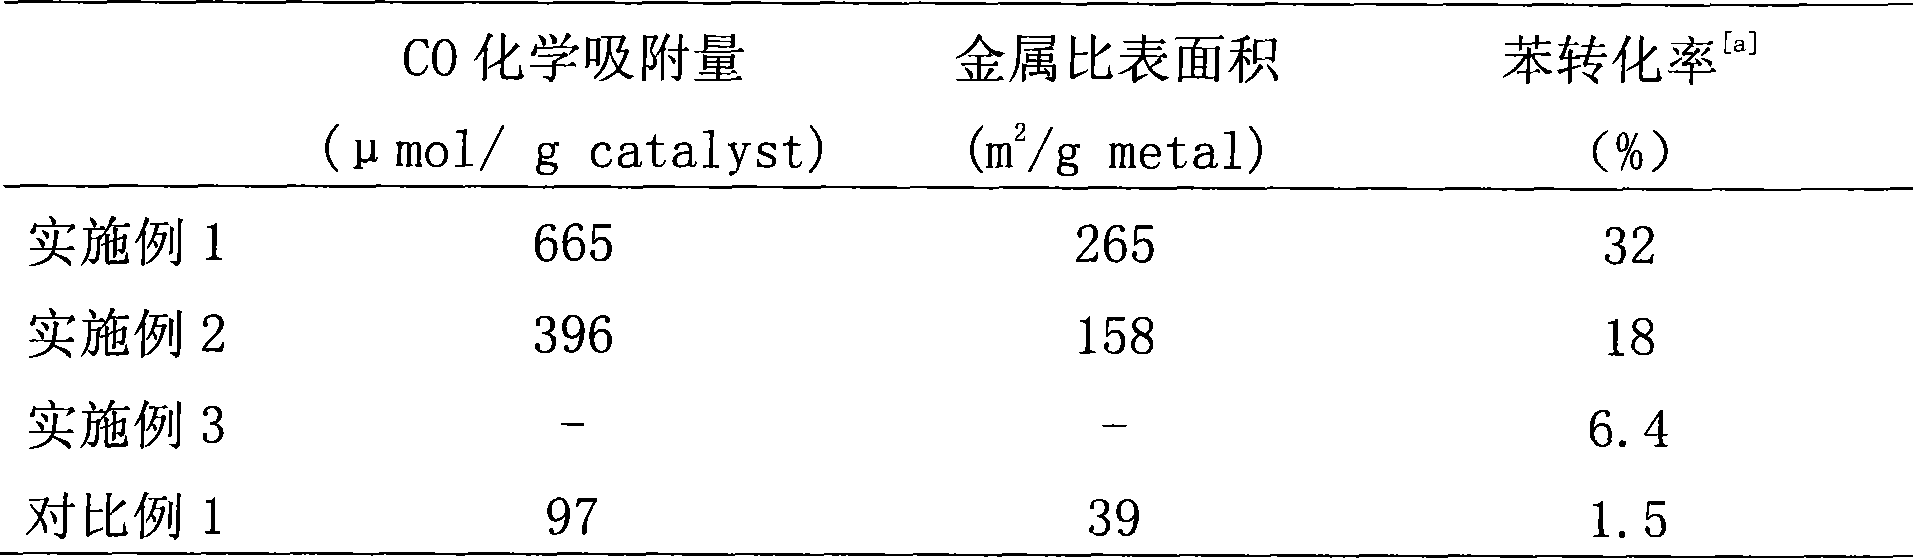 Platinum-cobalt dual-metal catalyst with room-temperature benzene hydrogenation activity and preparation method thereof